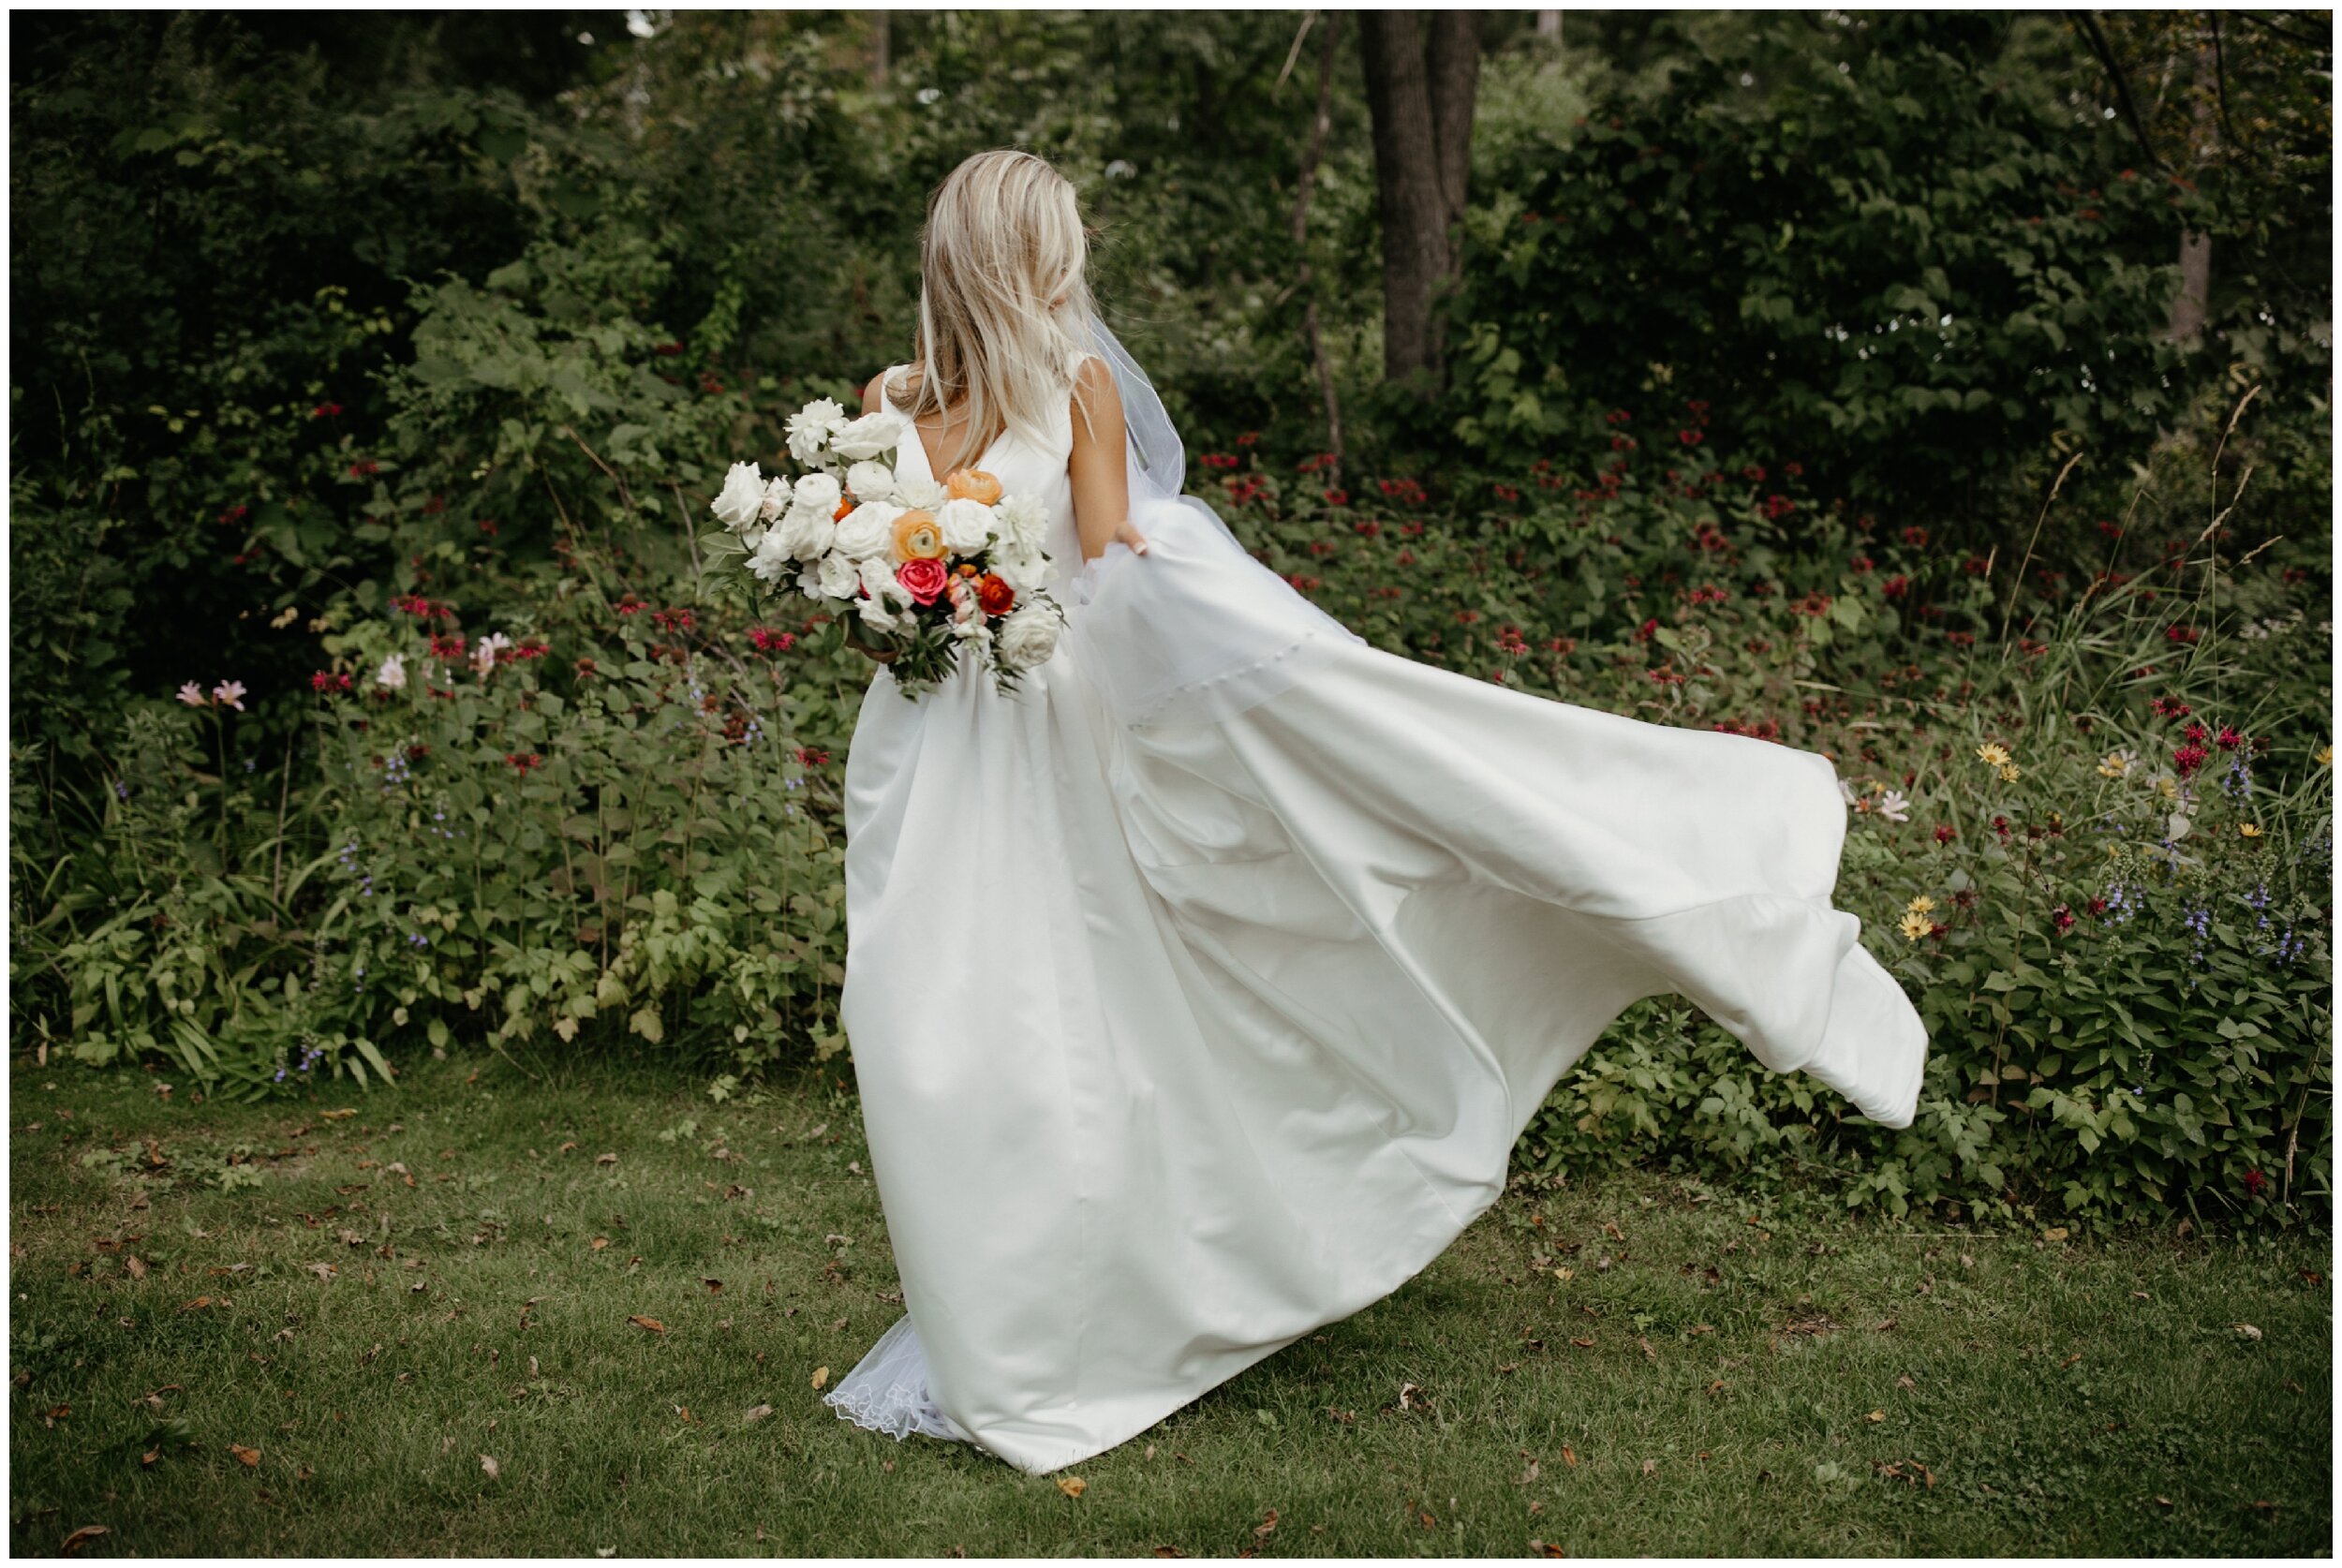 Bride's ballgown wedding dress caught in the wind during luxury Minnesota wedding at Grand View Lodge